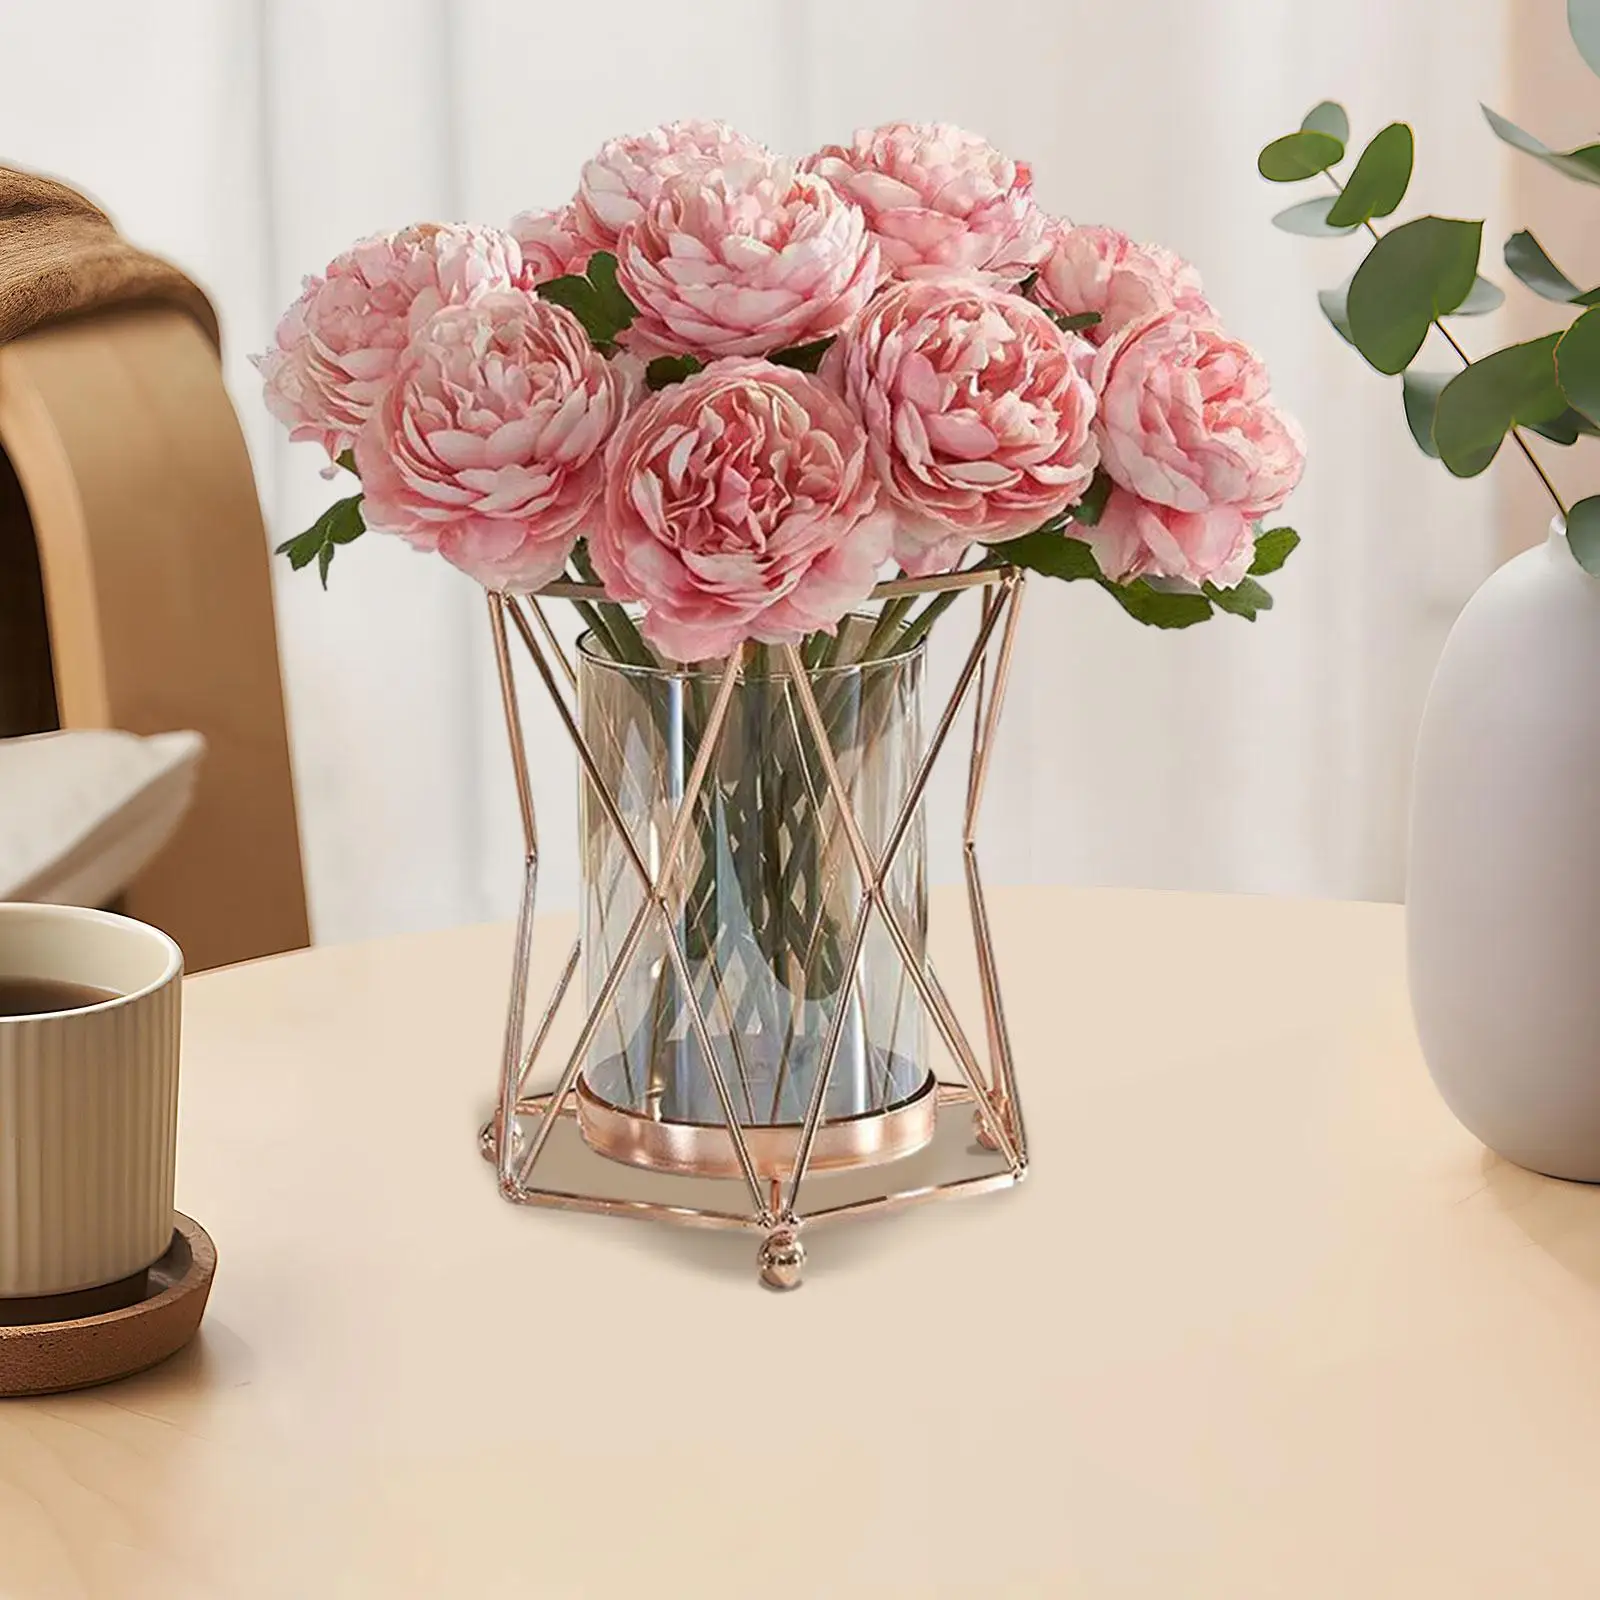 Flower Vase Glass Candle Holder Candle Stand Decorative Vase for Fake Flowers Table Centerpiece Housewarming Gifts Room Home